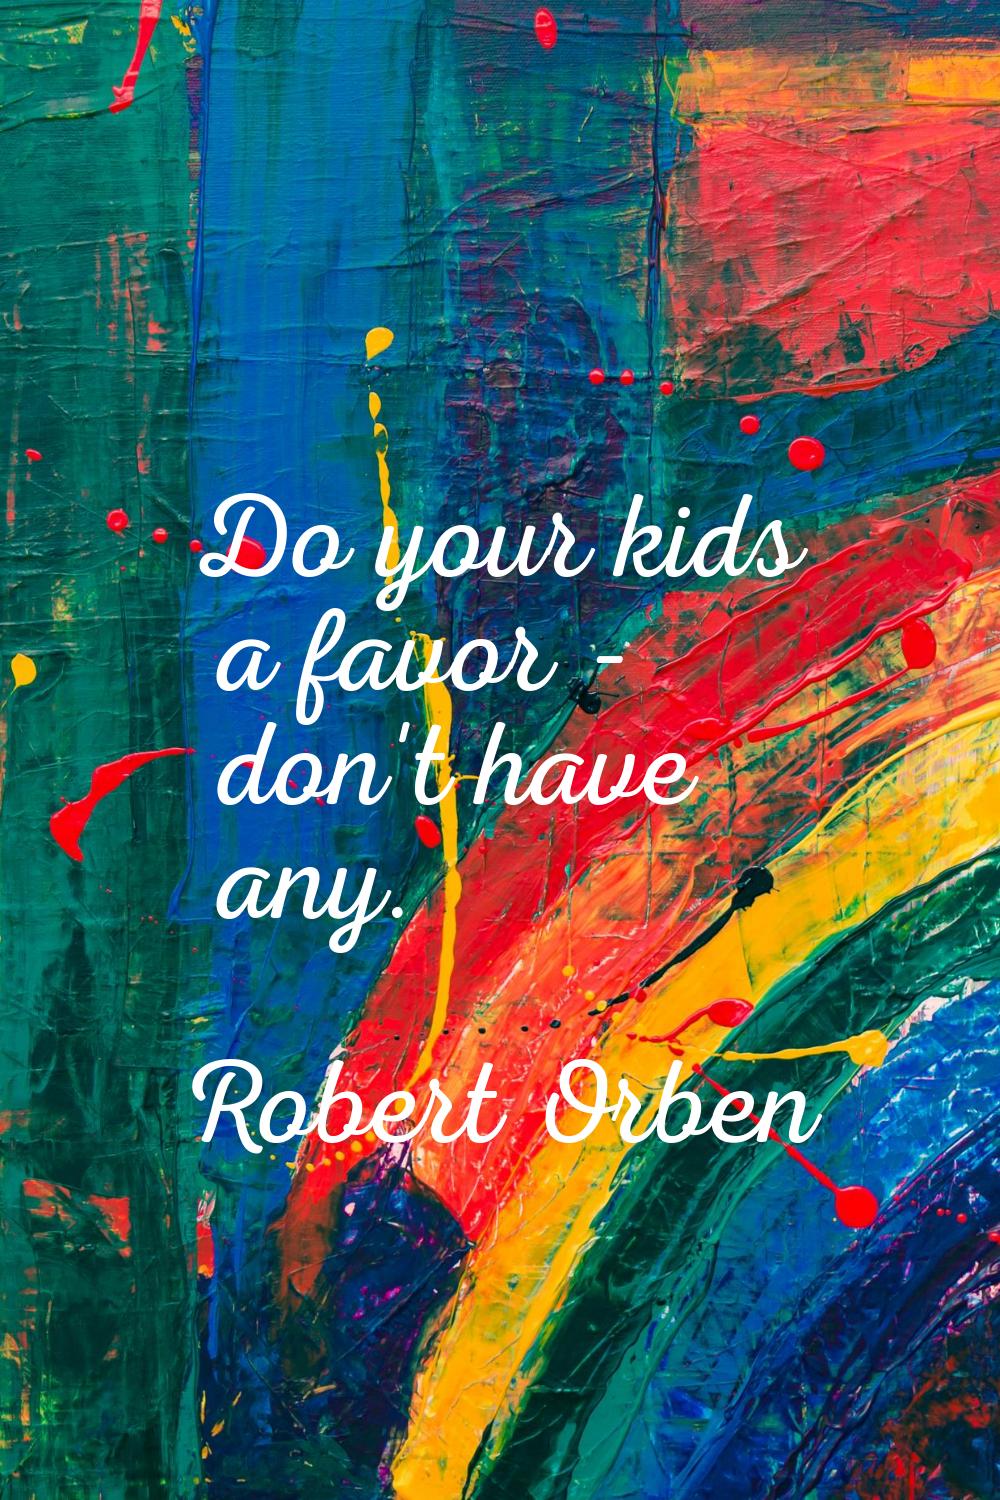 Do your kids a favor - don't have any.